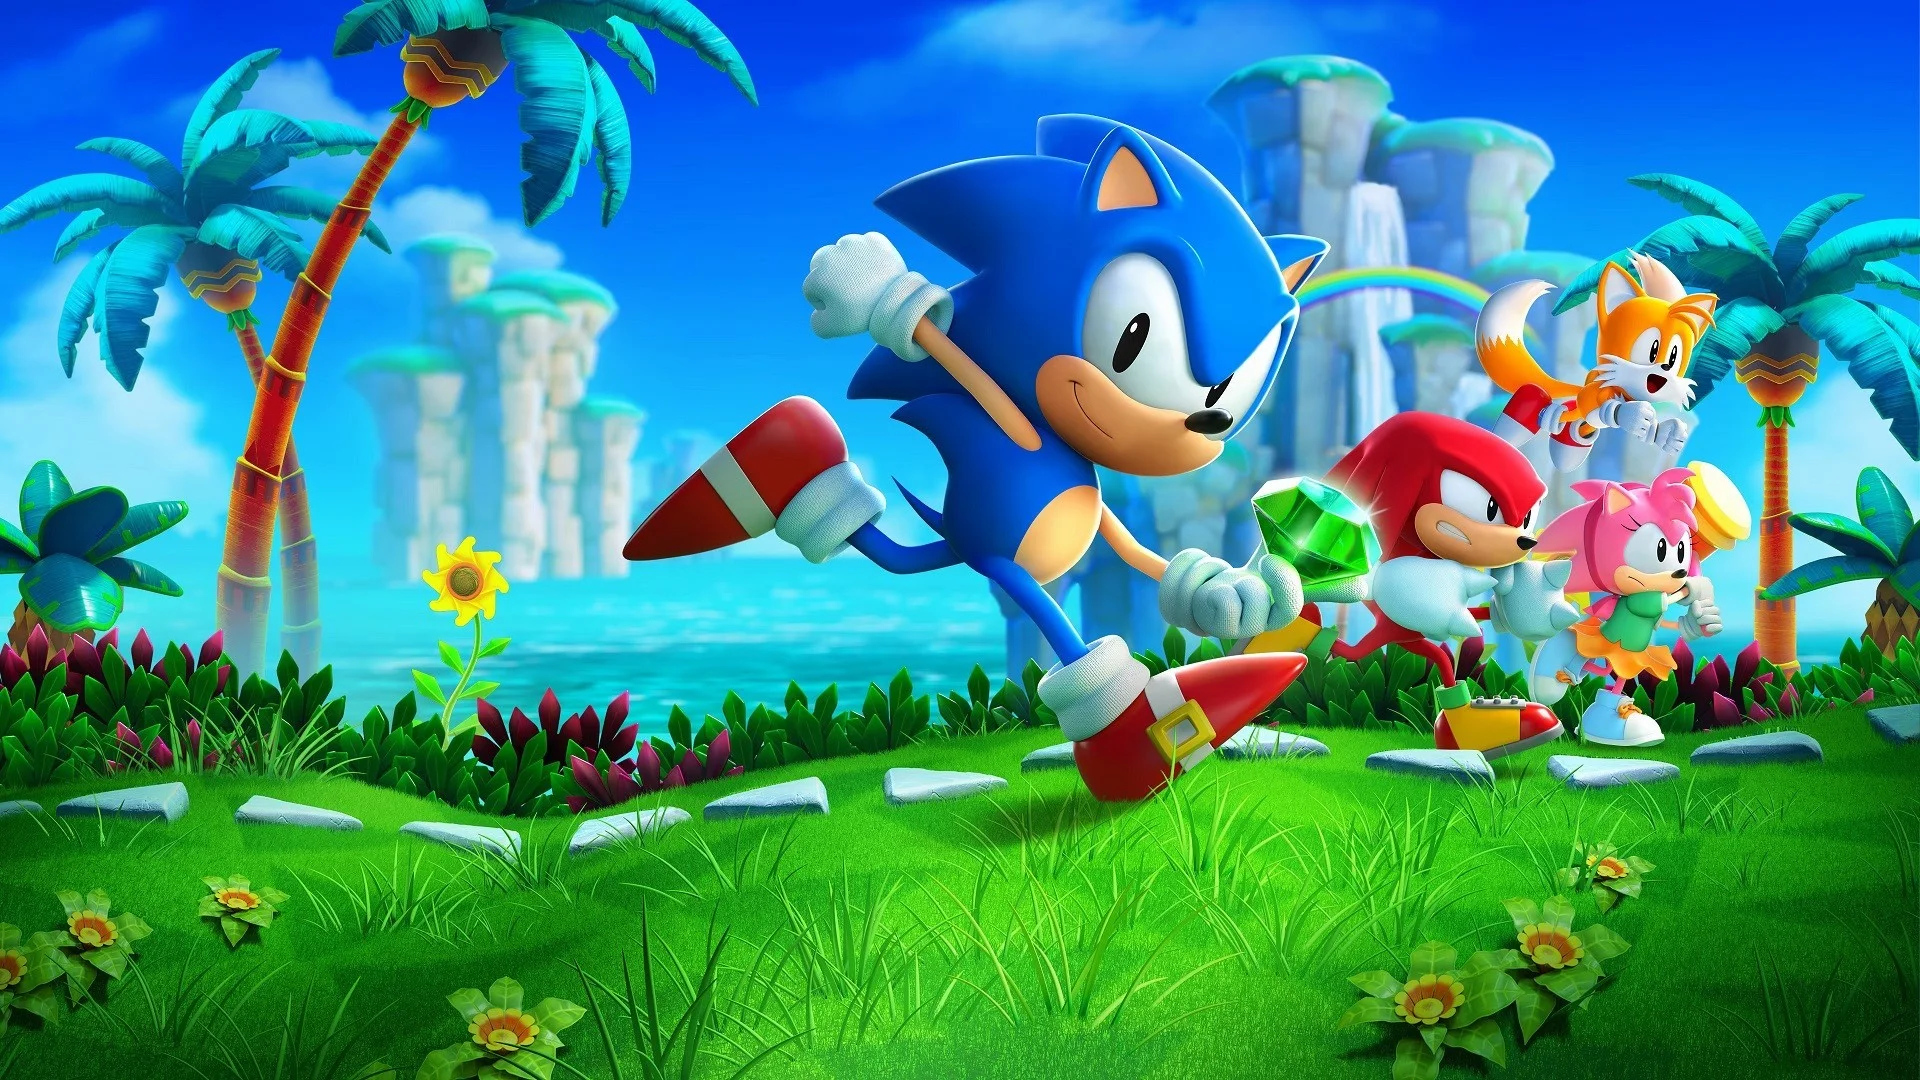 SEGA will release a mobile Sonic spin-off that will be similar to Fall Guys